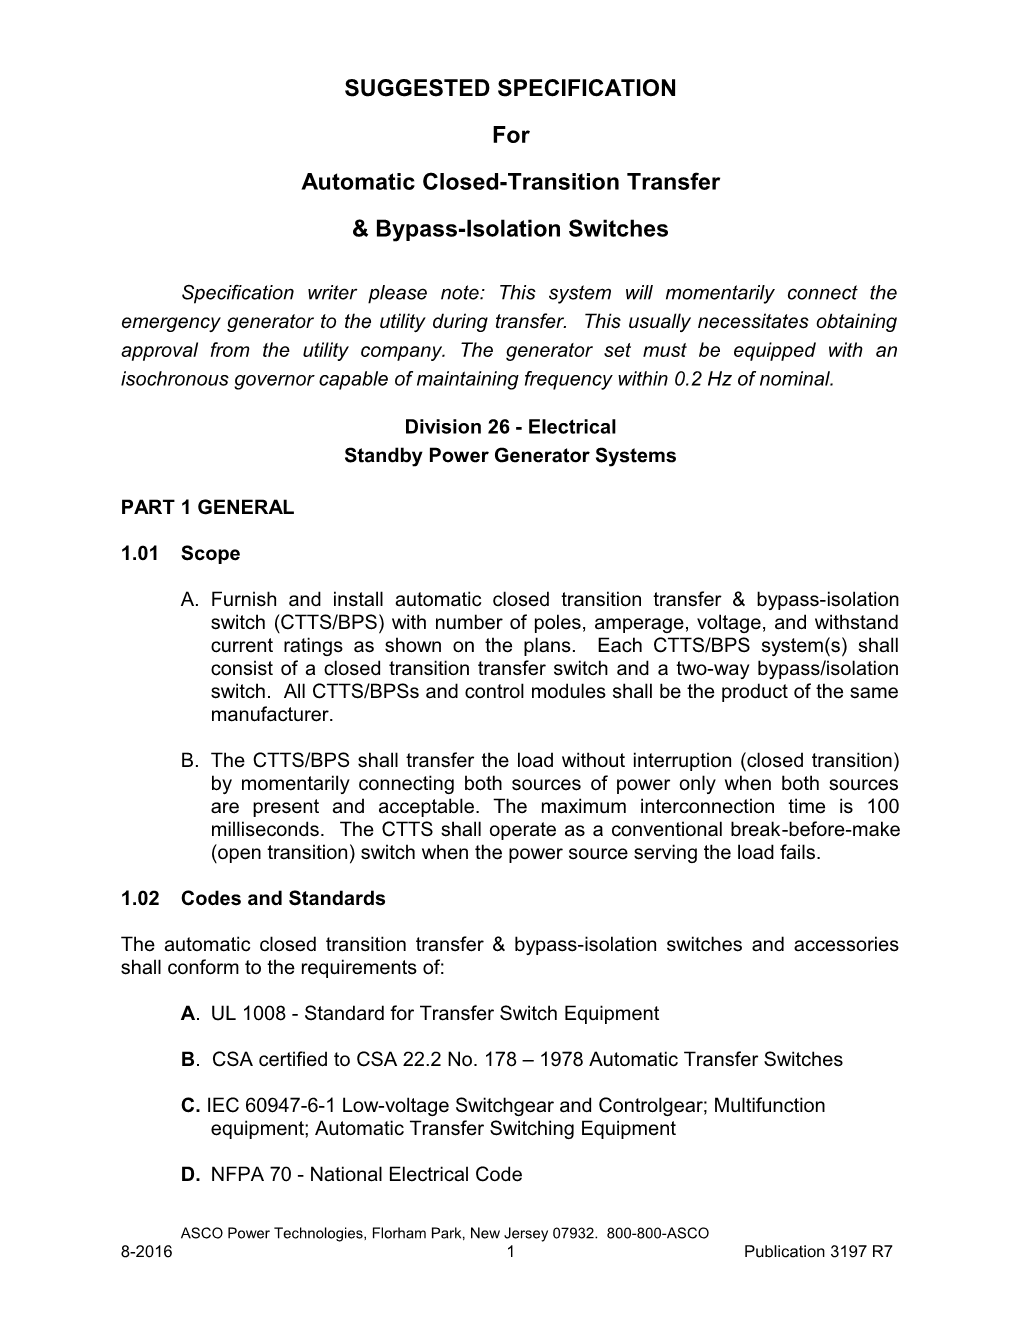 ASCO 7000 Series SUGGESTED SPECIFICATION for Automatic Closed-Transition Transfer &